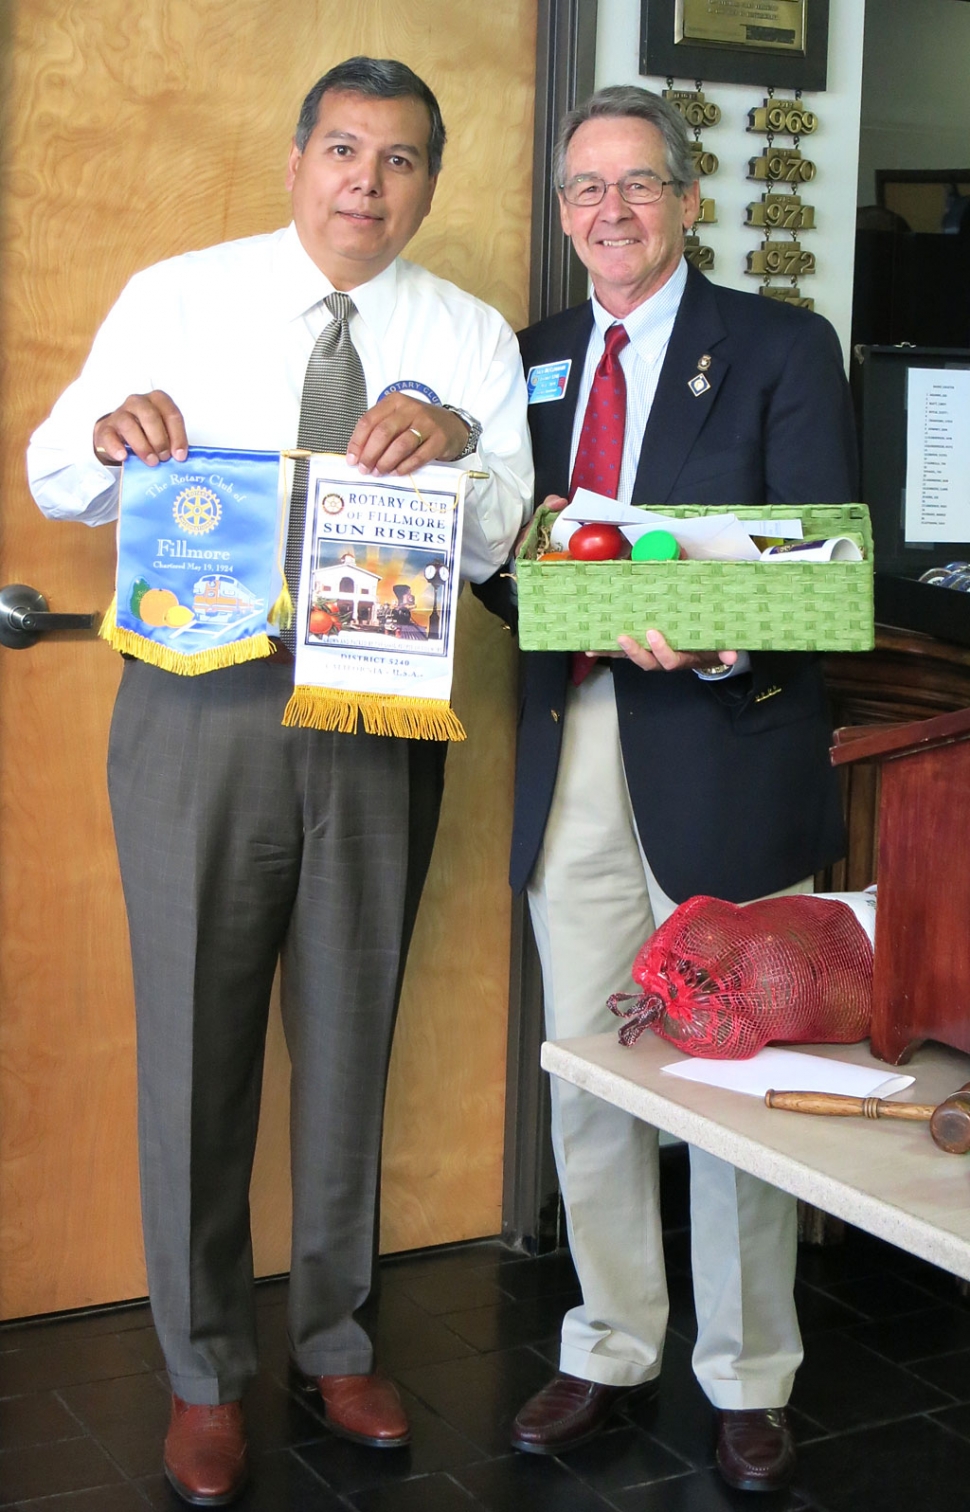 Rigo Landeros, Rotary Club President, presented District Governor Jack McClenahan with the club banners and a basket of locally grown produce.